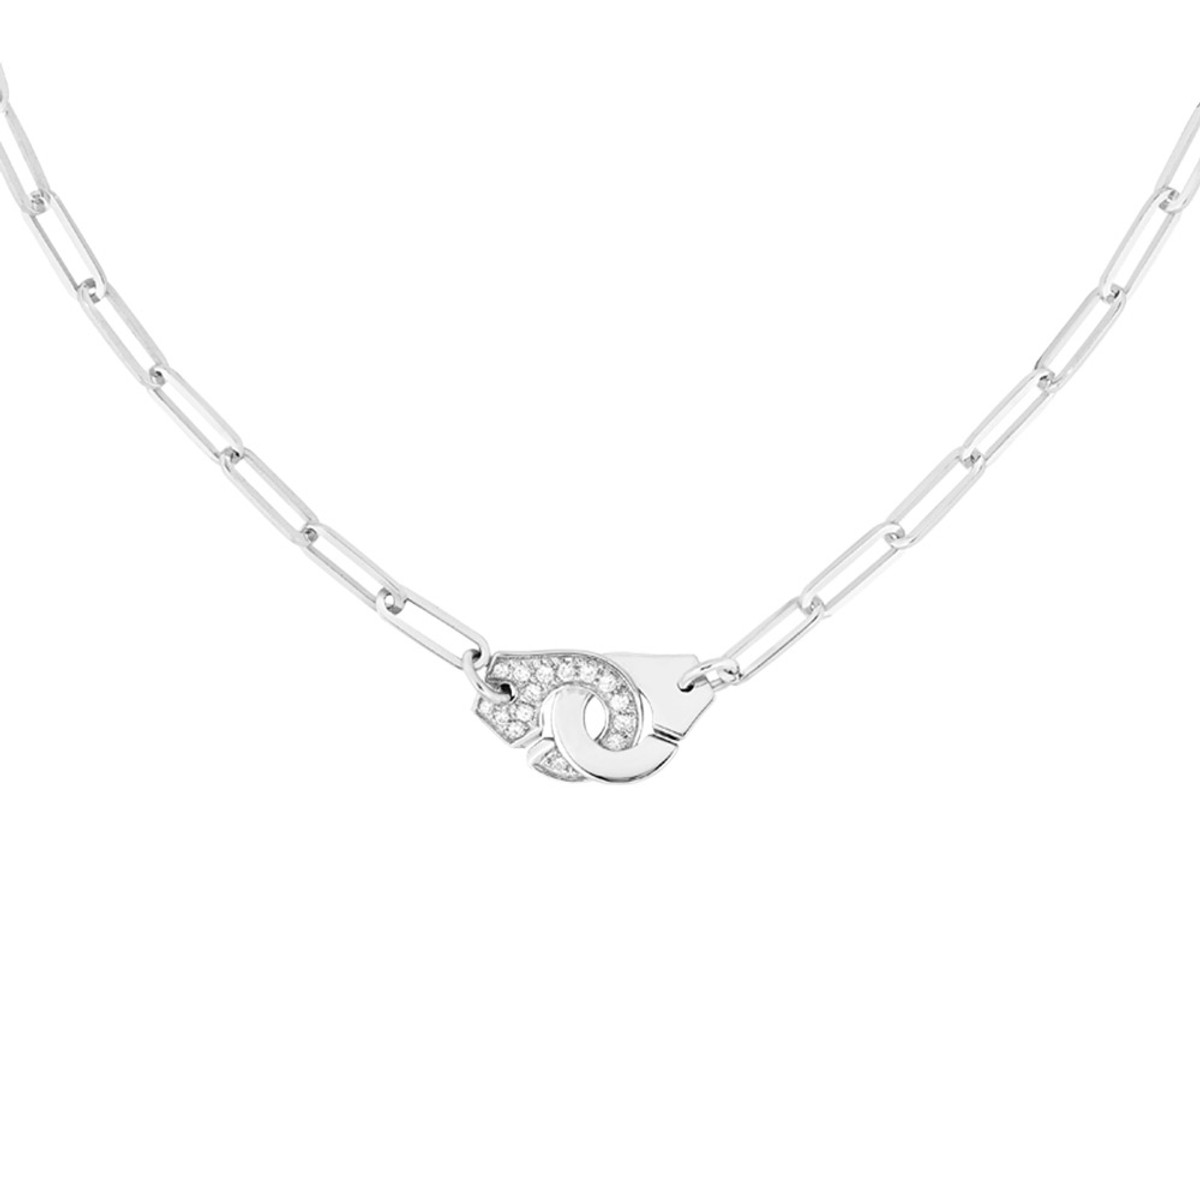 Dinh Van Menottes 18KT White Gold & Diamond R12 Necklace-DNKFY7509 Product Image